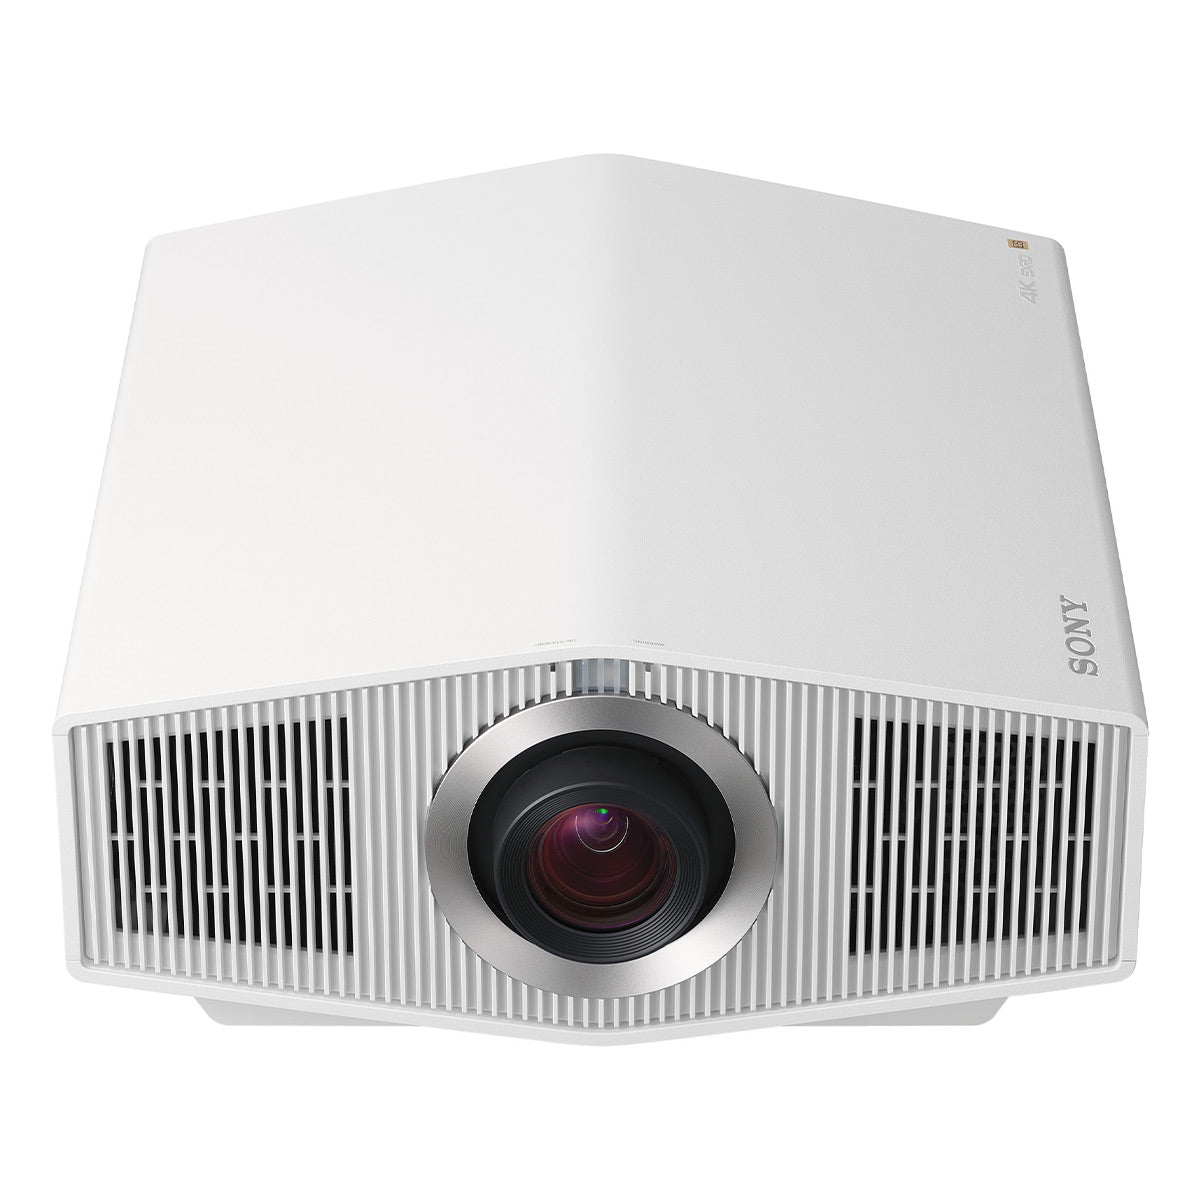 Sony VPL-XW6000ES 4K HDR Laser Home Theater Projector with Wide Dynamic Range Optics, 95% DCI-P3 Wide Color Gamut, and 2,500 Lumen Brightness (White)